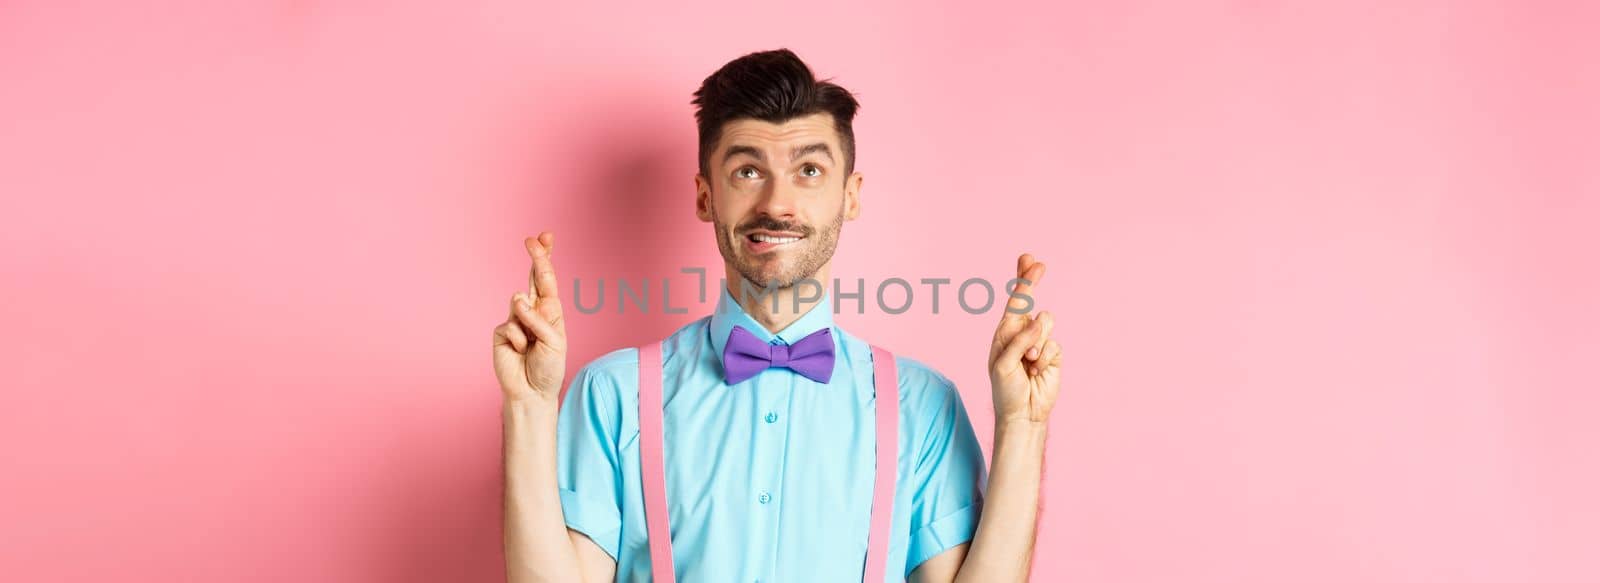 Smiling young man in bow-tie, making wish, praying and looking up, cross fingers for good luck, standing hopeful over pink background. Copy space